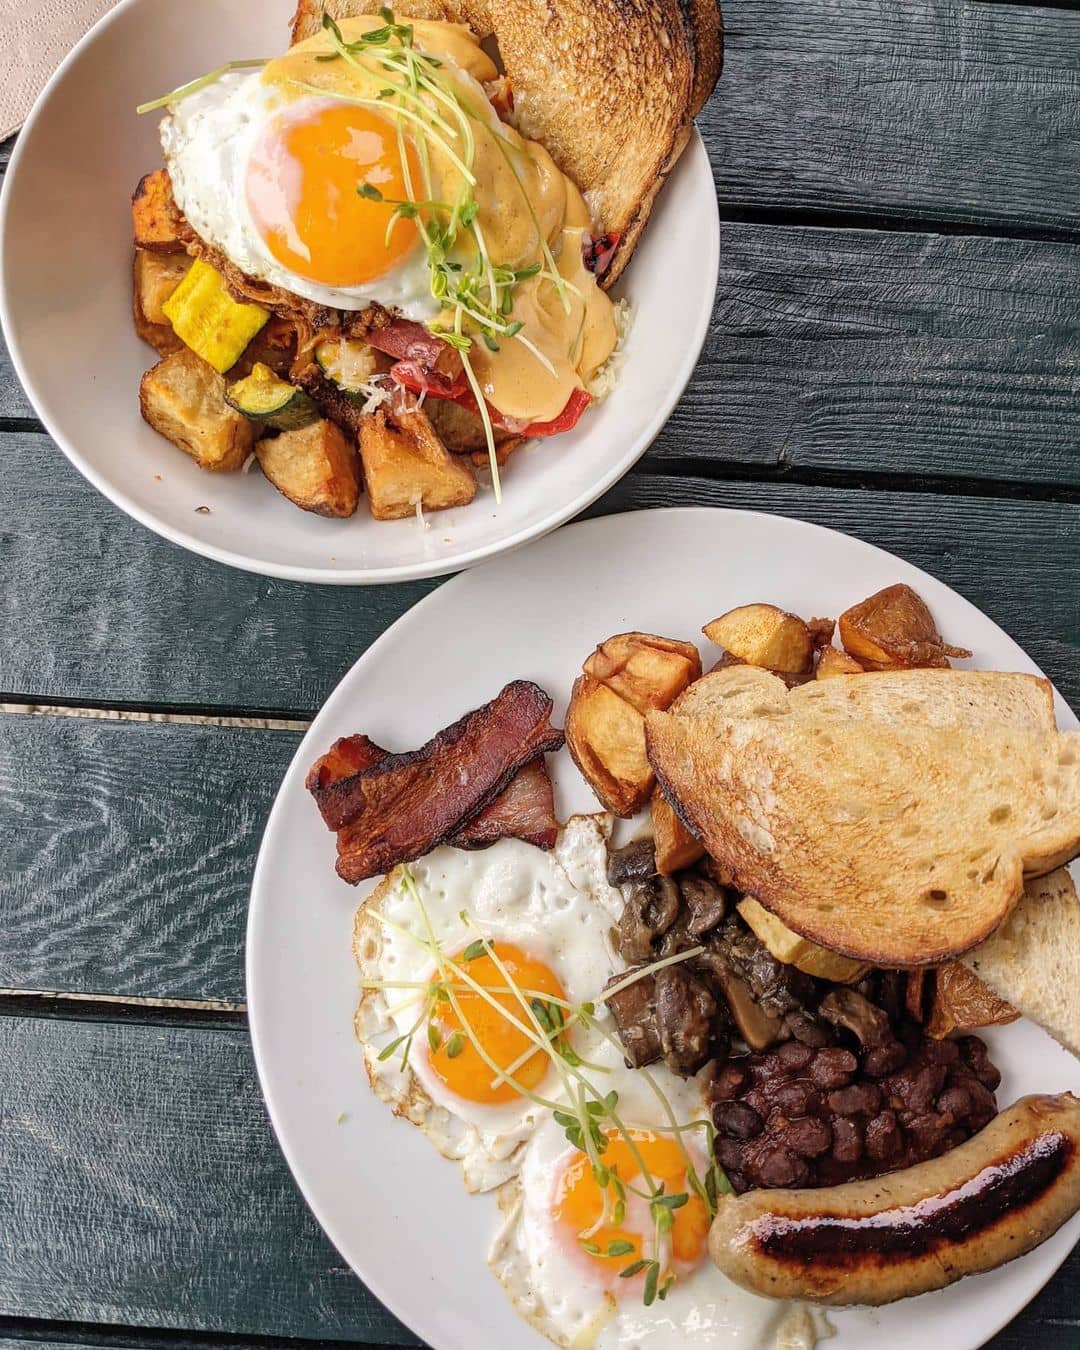 best squamish restaurants - fergies cafe brunch food with eggs and hashbrowns on wooden table